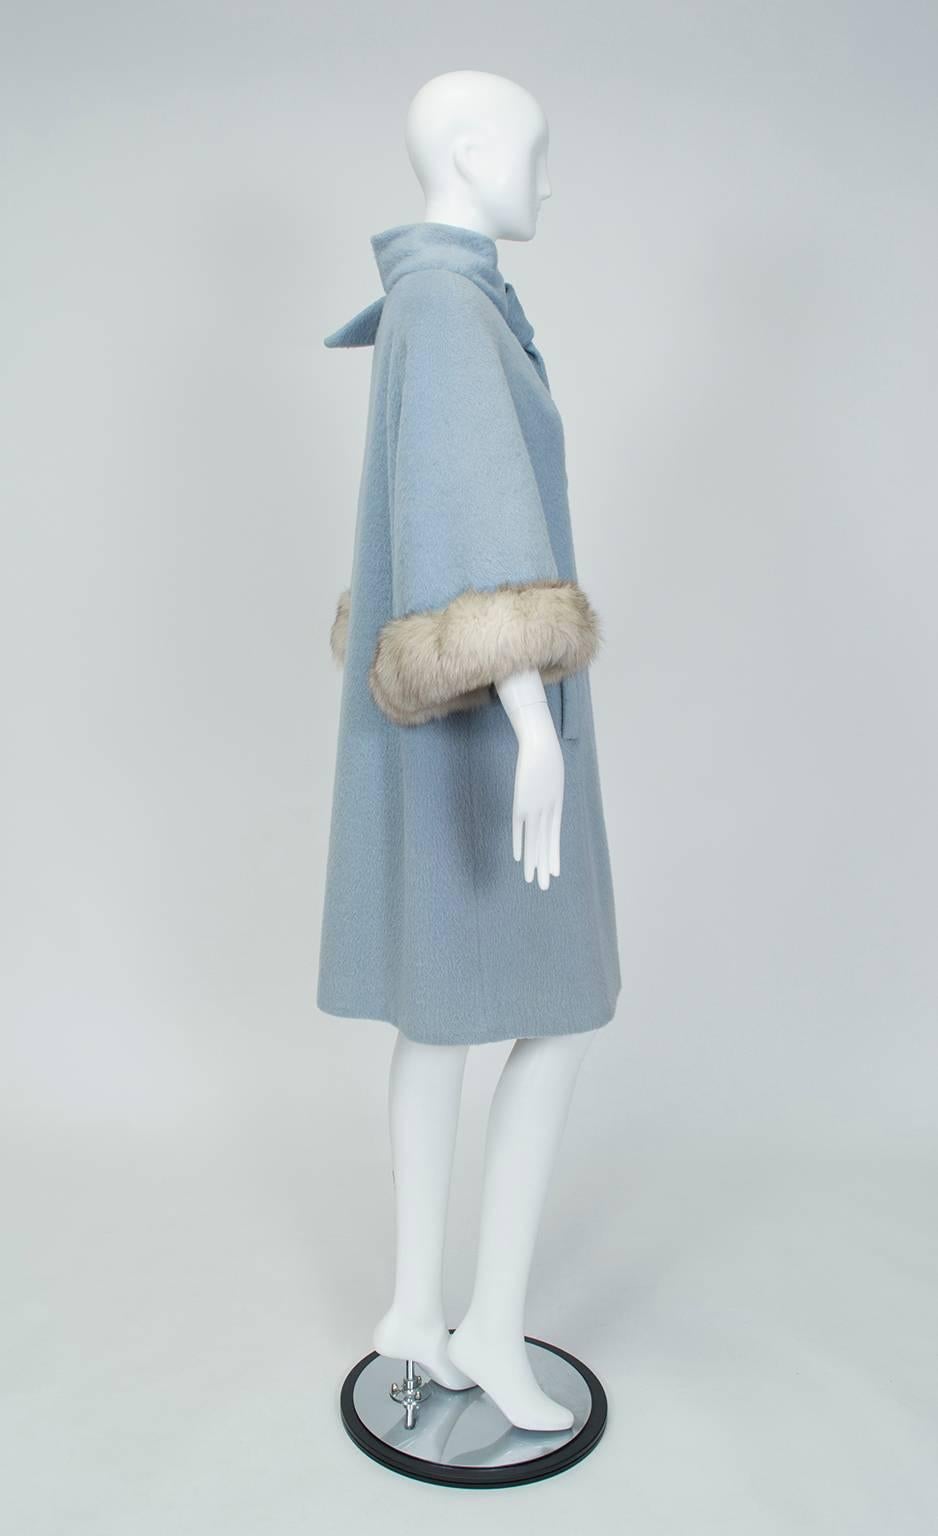 Sometimes a gentle reminder of blue sky is all it takes to get through a dreary winter. With its ideal hue and ingenious design, this coat is up to the task: fully-functional coat sleeves are concealed by a fluttering cape trimmed in silver fox fur.